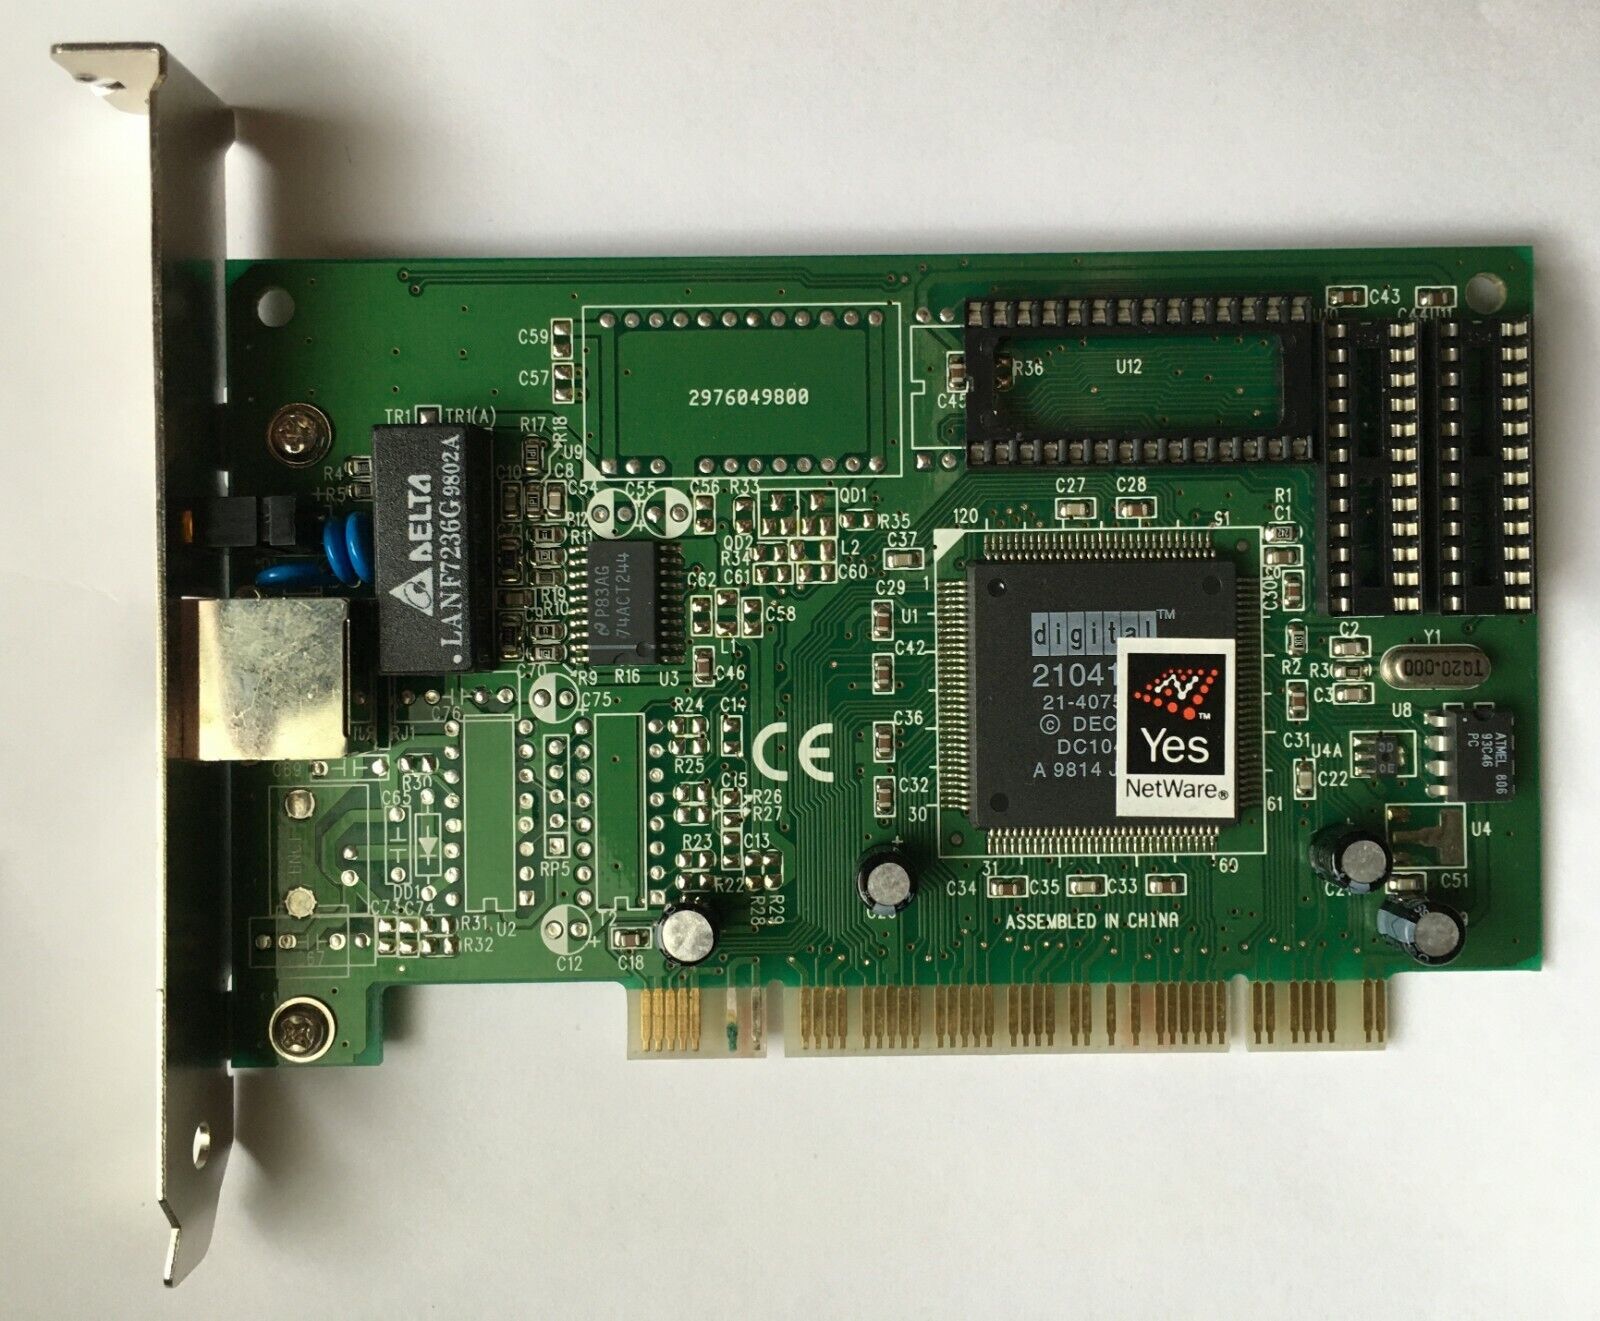 Yes PC Network Card 856A03708 E/PCI 10MBIT